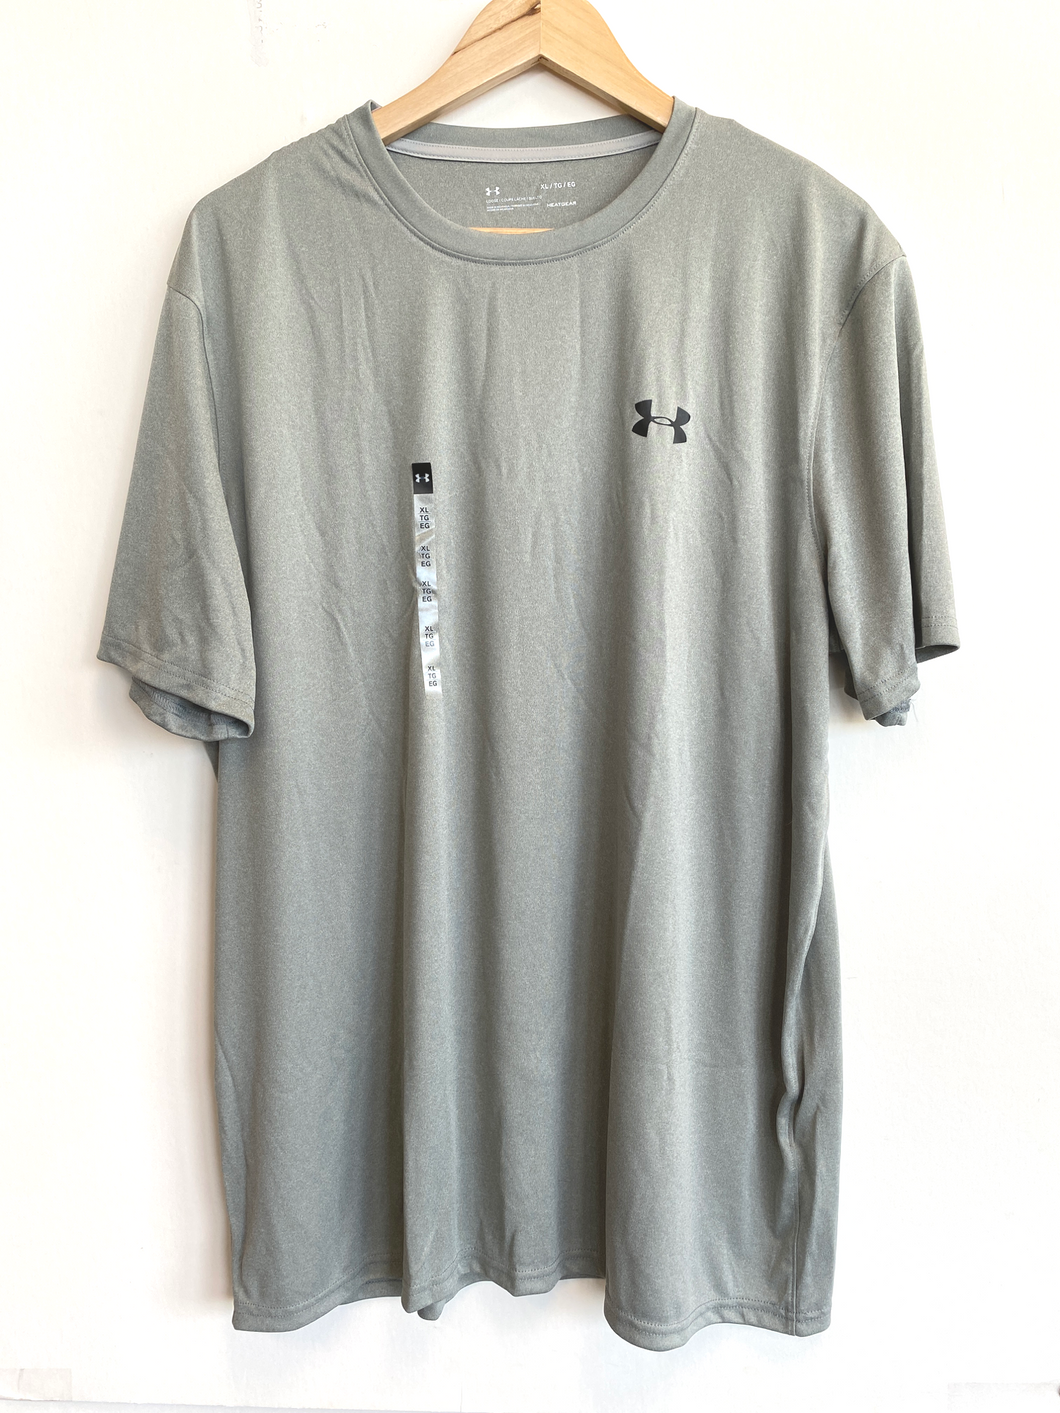 Under Armour Athletic Top Size Extra Large